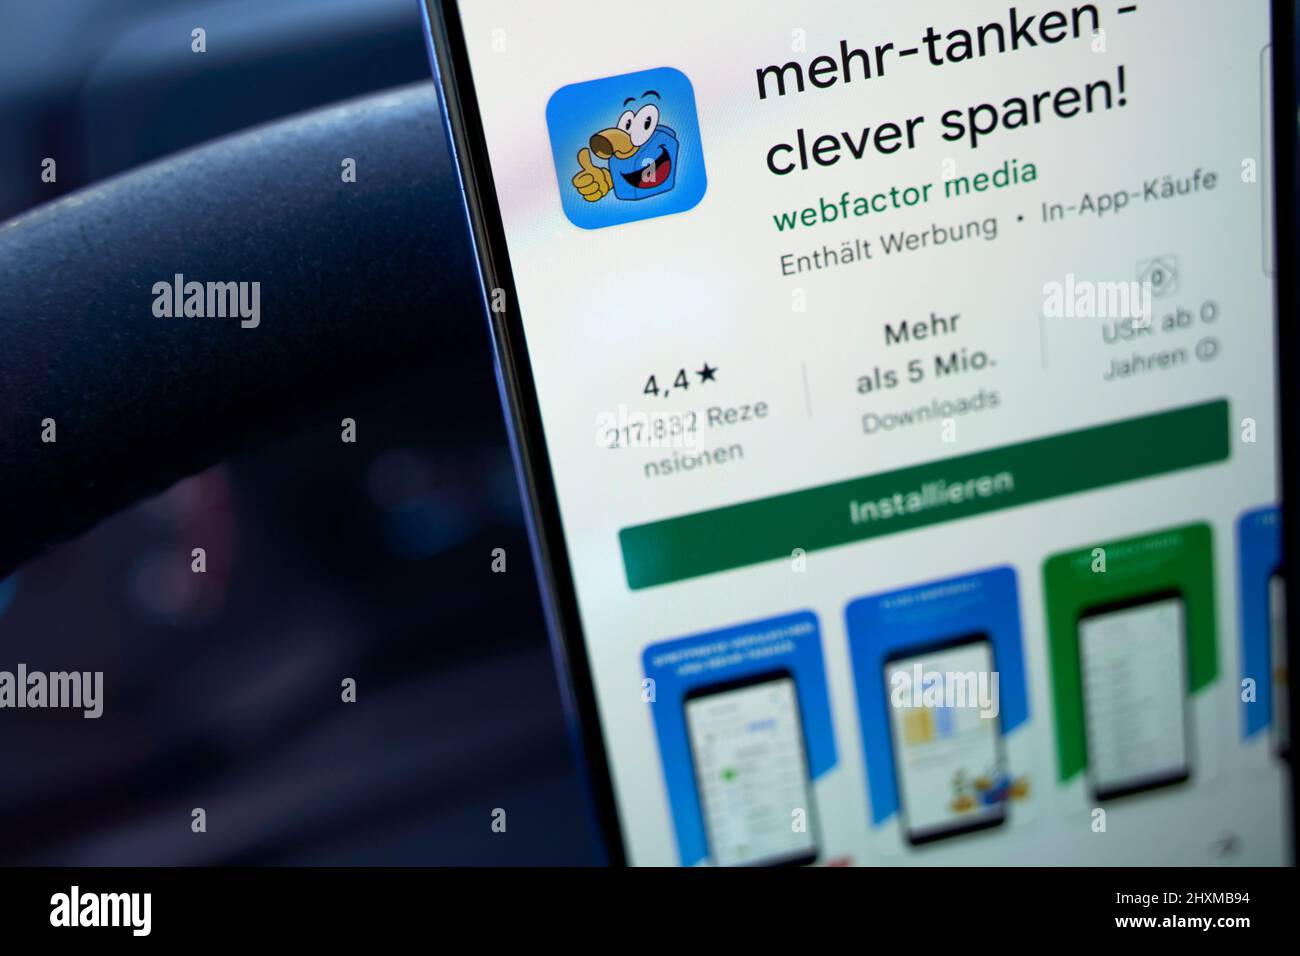 Stuttgart, Germany - March 11, 2022: App mehr-tanken-clever sparen, finds cheapest fuel, diesel and gasoline at gas stations (Tankstelle). Smartphone Stock Photo